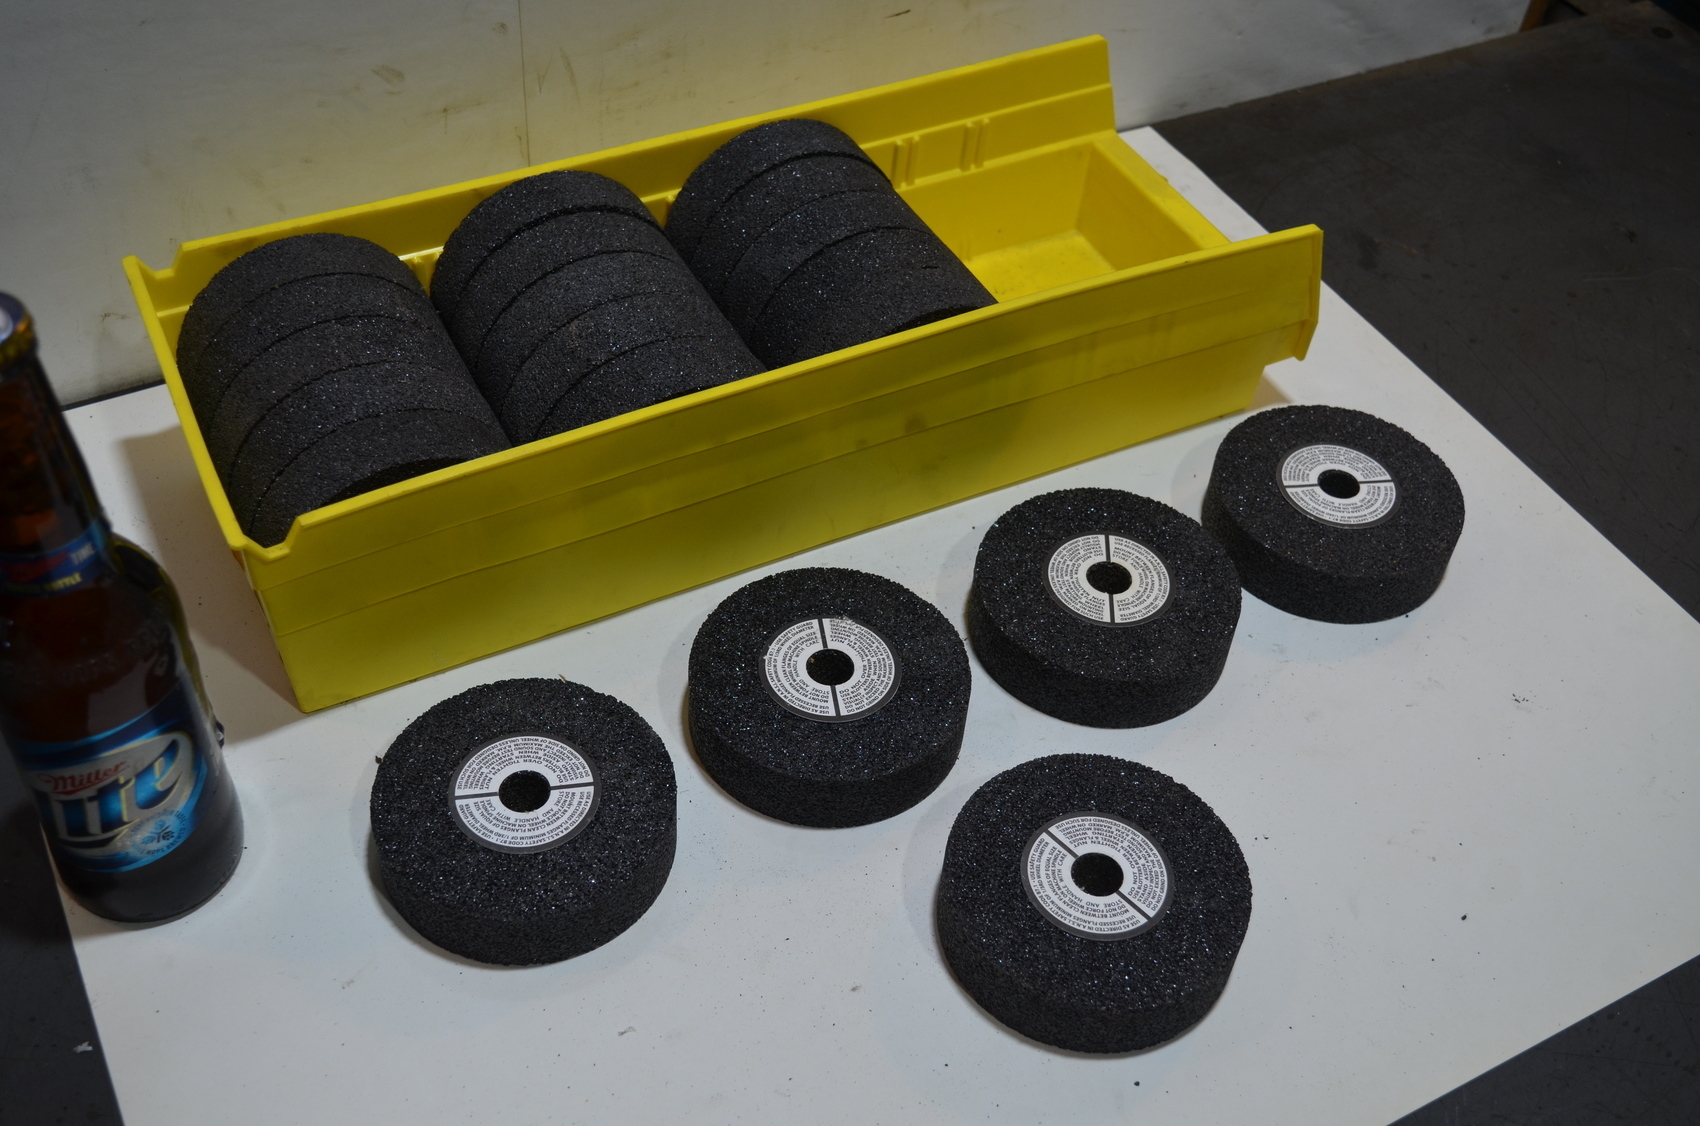 Lot of 20 GRIER Grinding Wheels 4*5/8*1